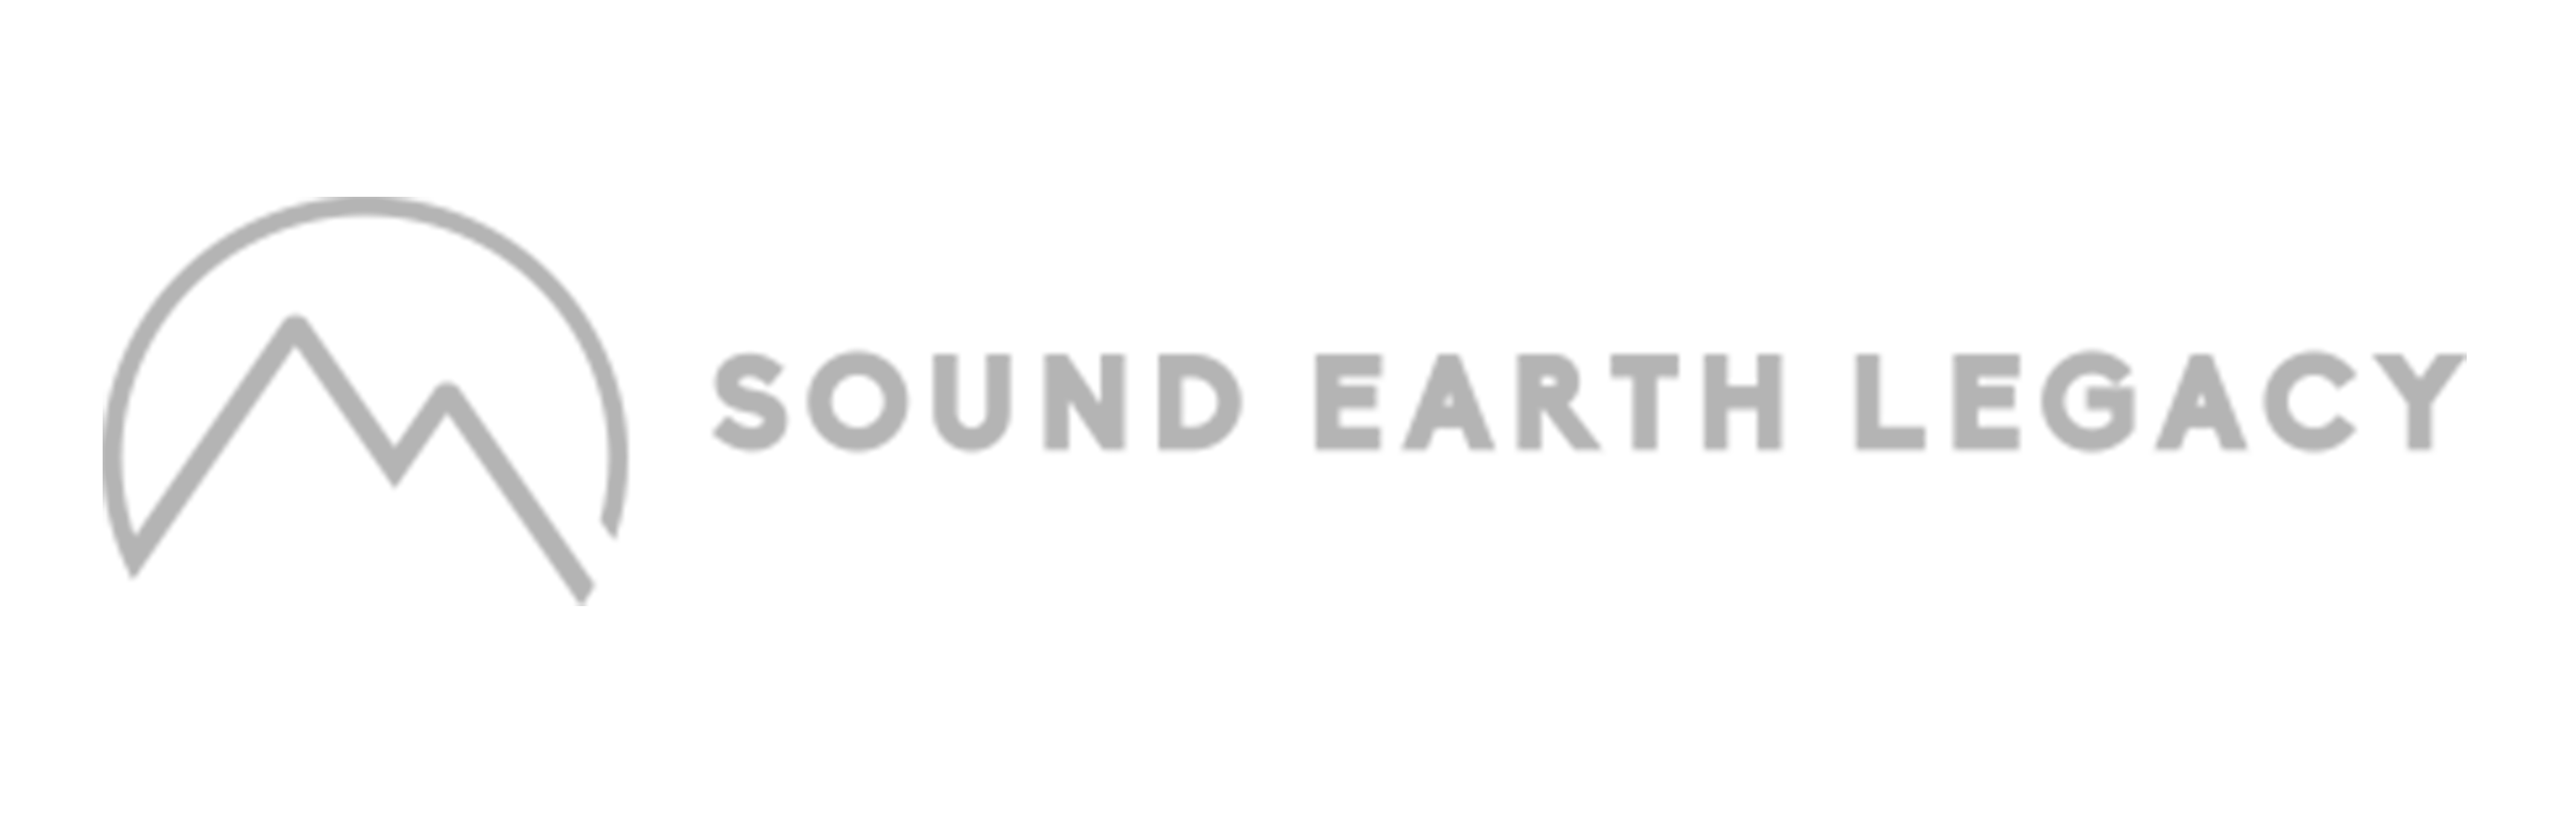 sound earth png